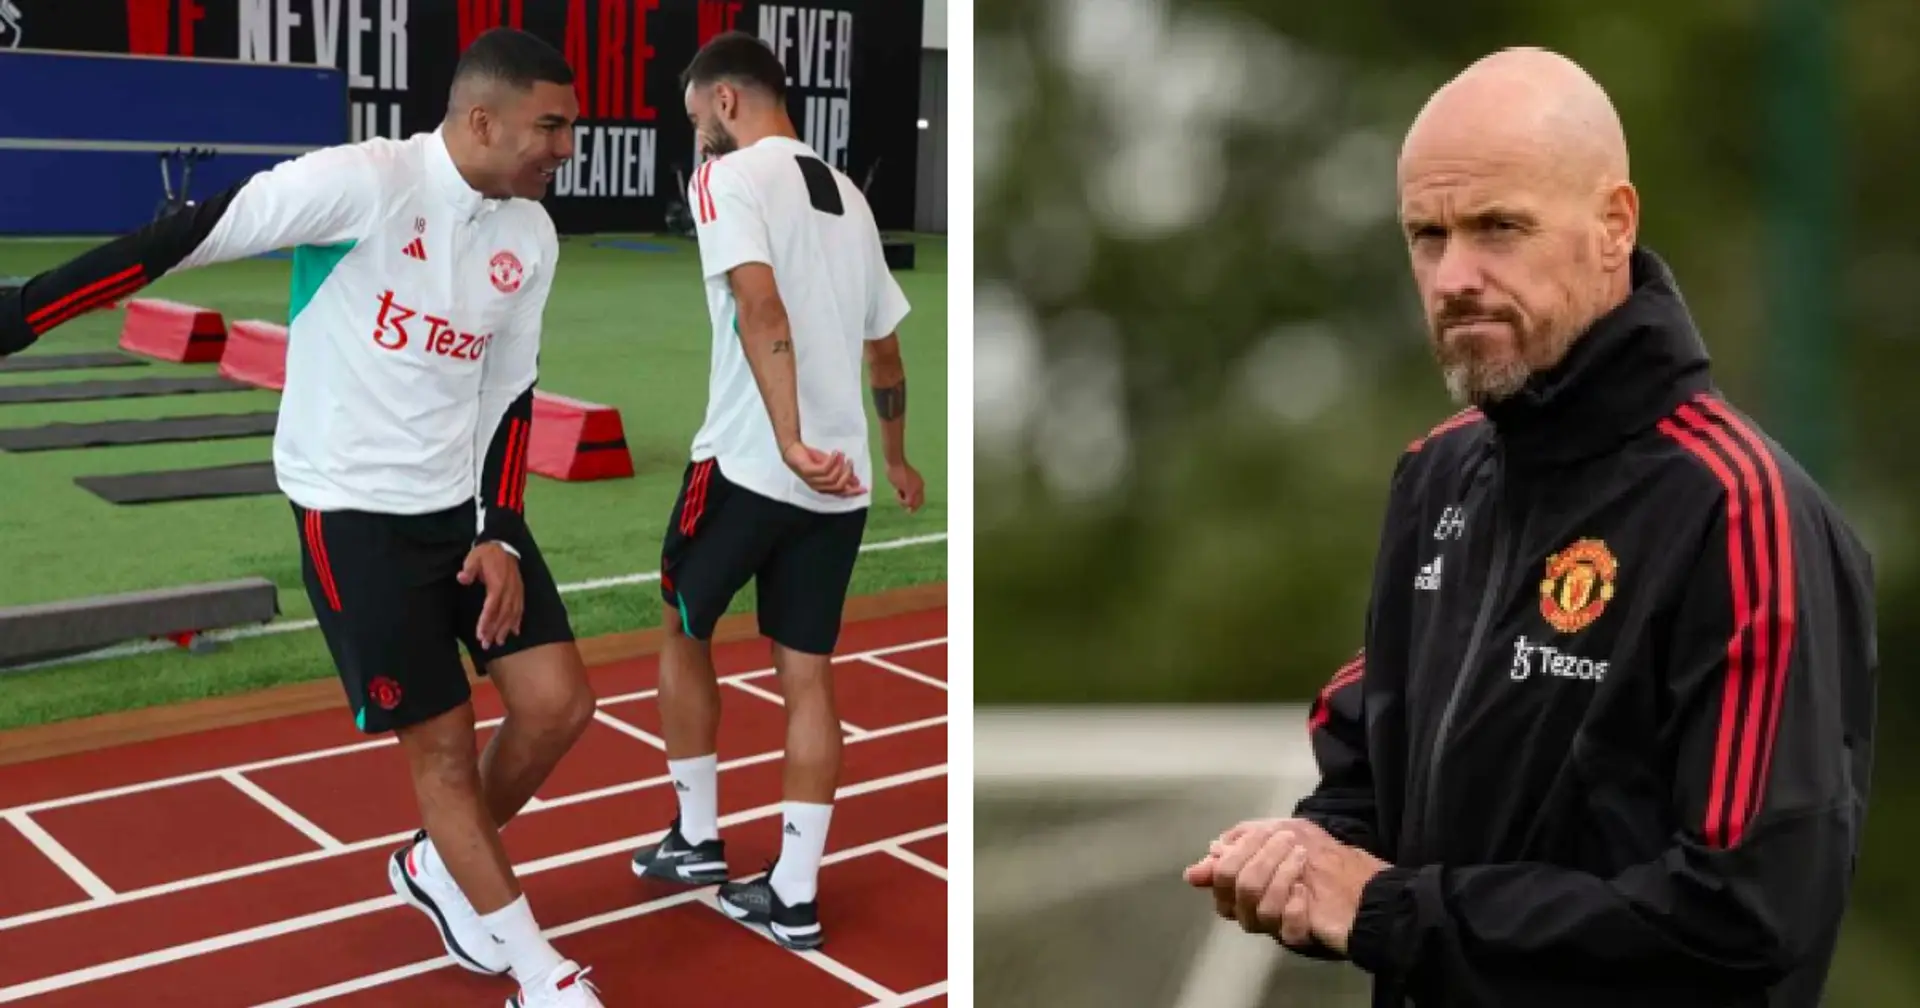 Two Man United players yet to report to training - they could leave for free 